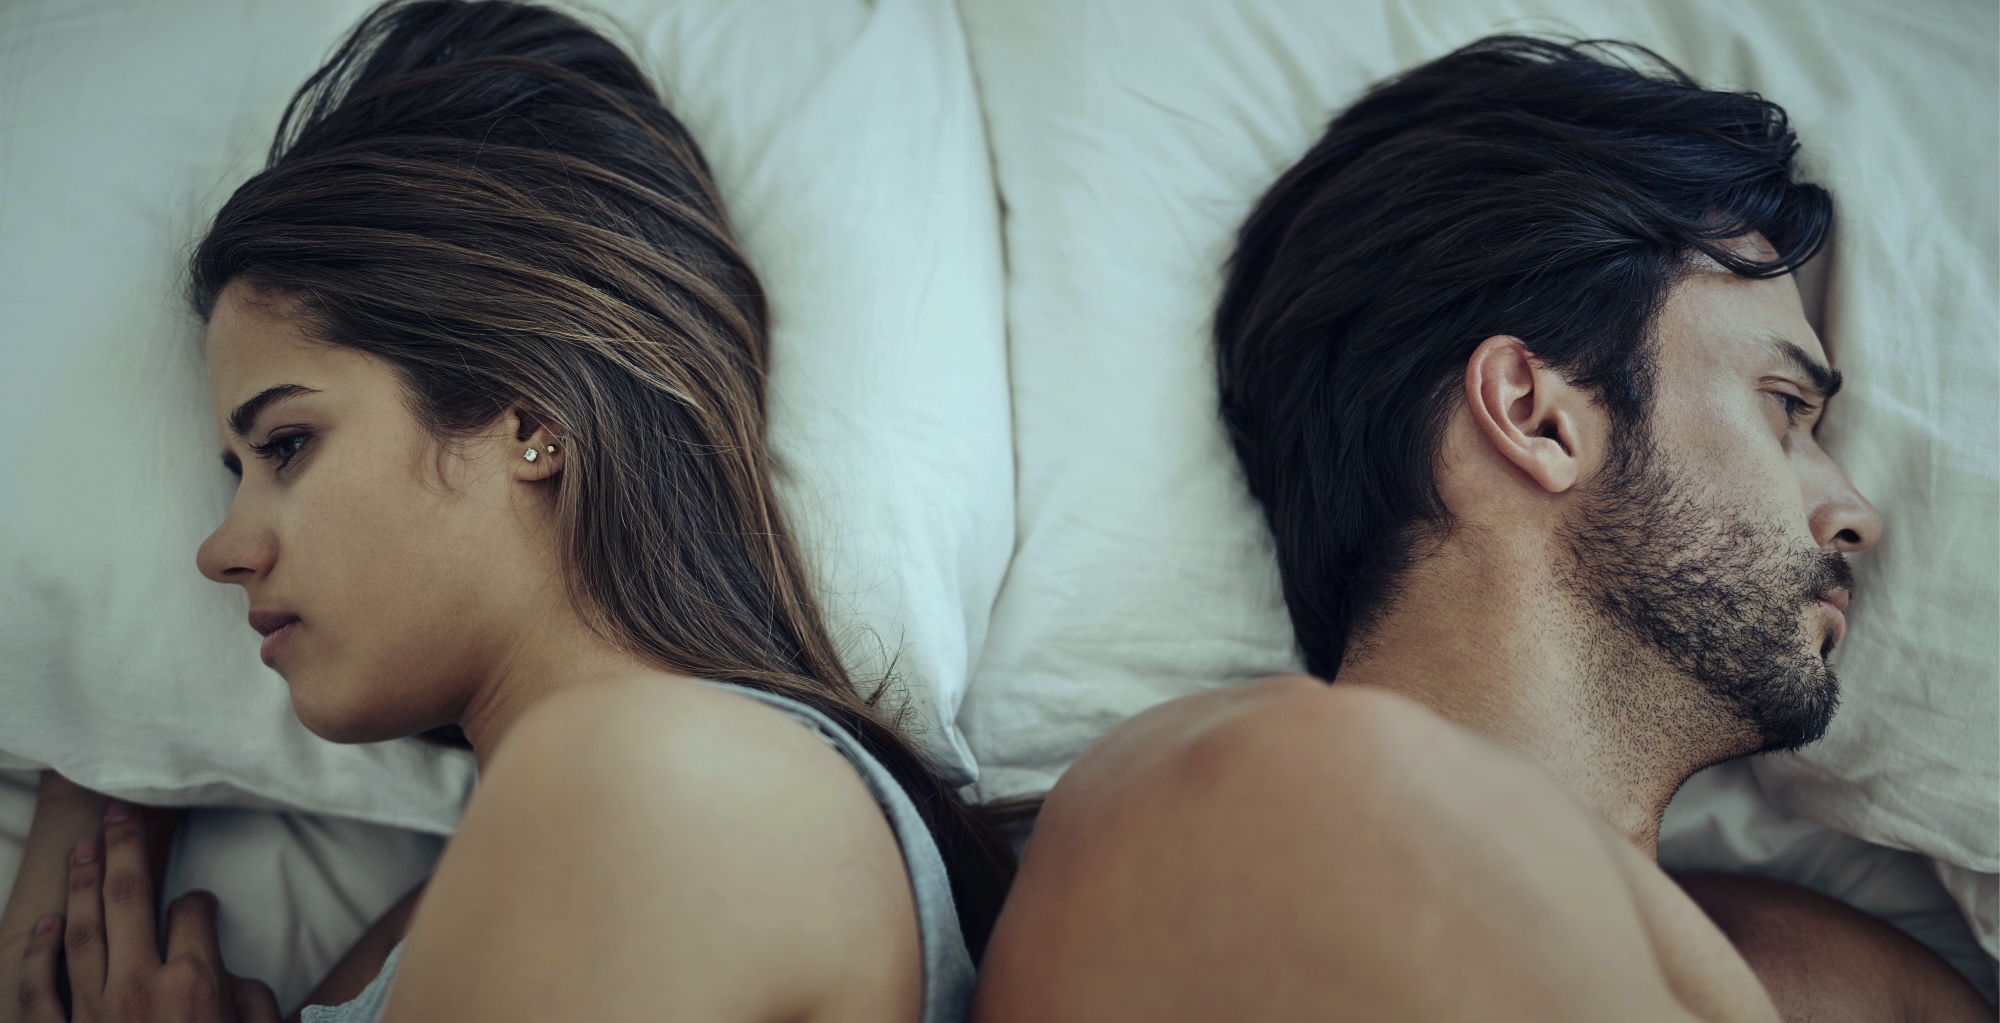 bed-couple-unhappy-sad-porn-ruins-equality-relationships